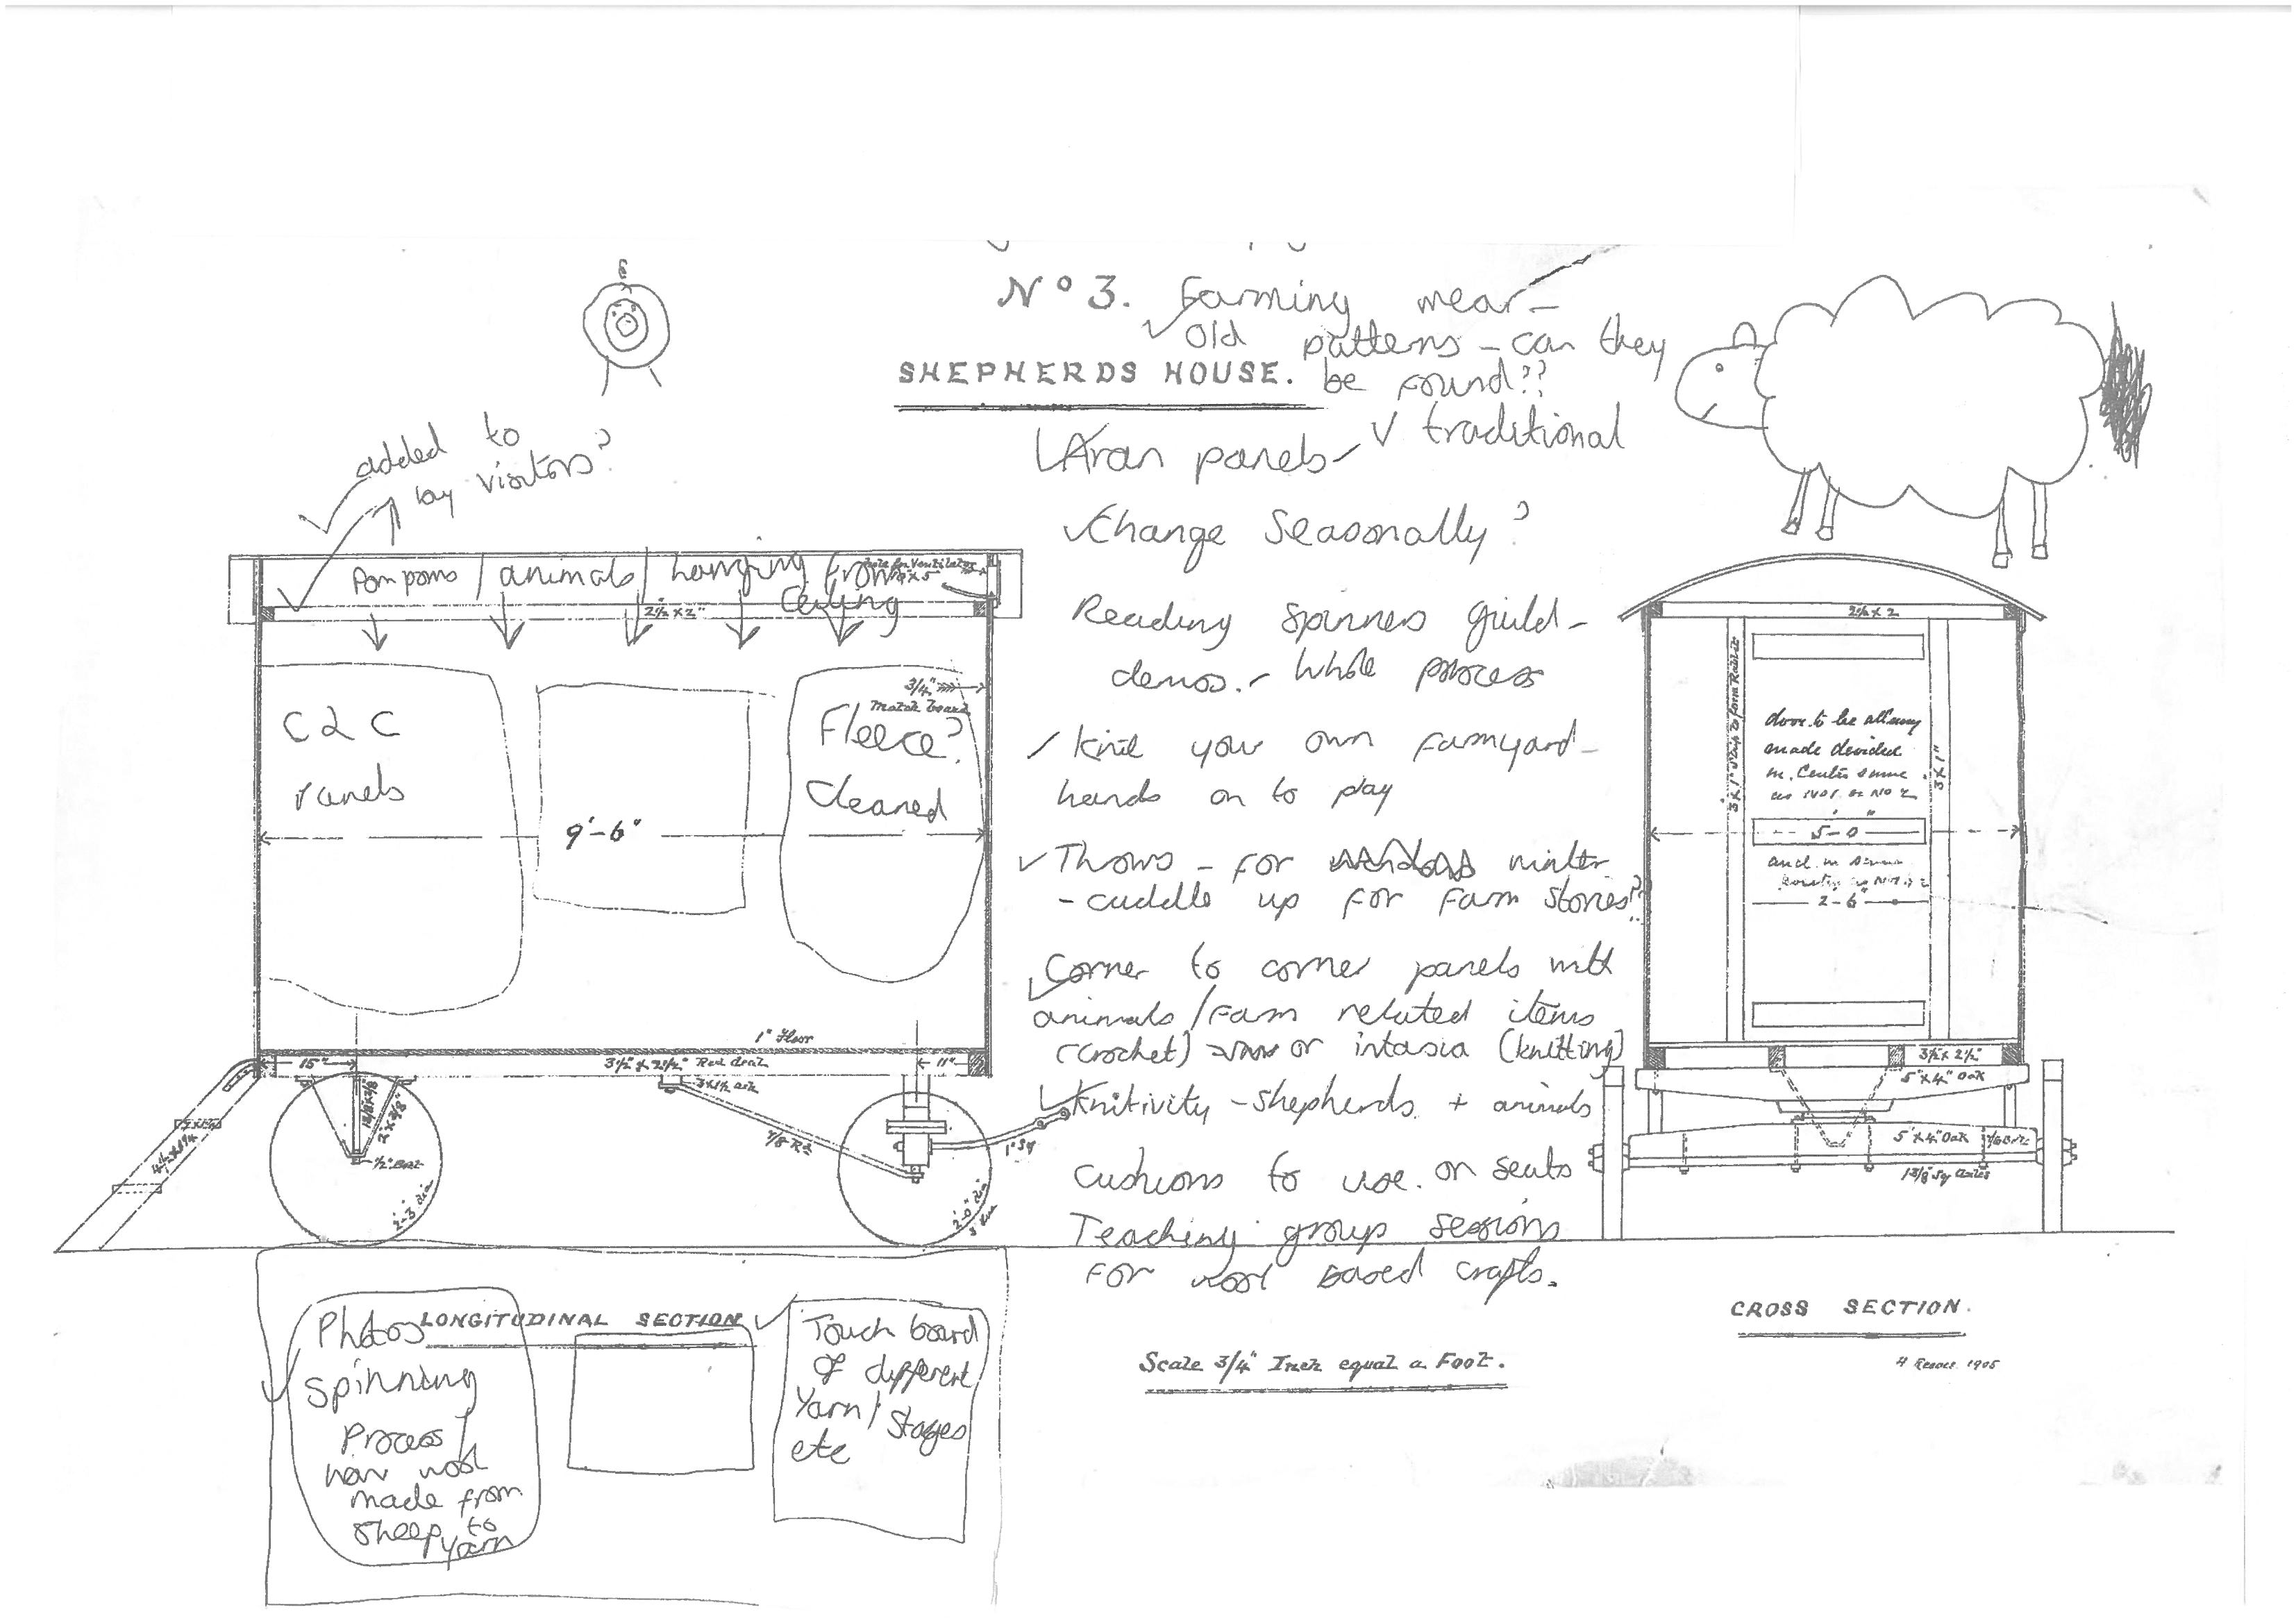 Annotated plans for how to decorate the Shepherds Hut